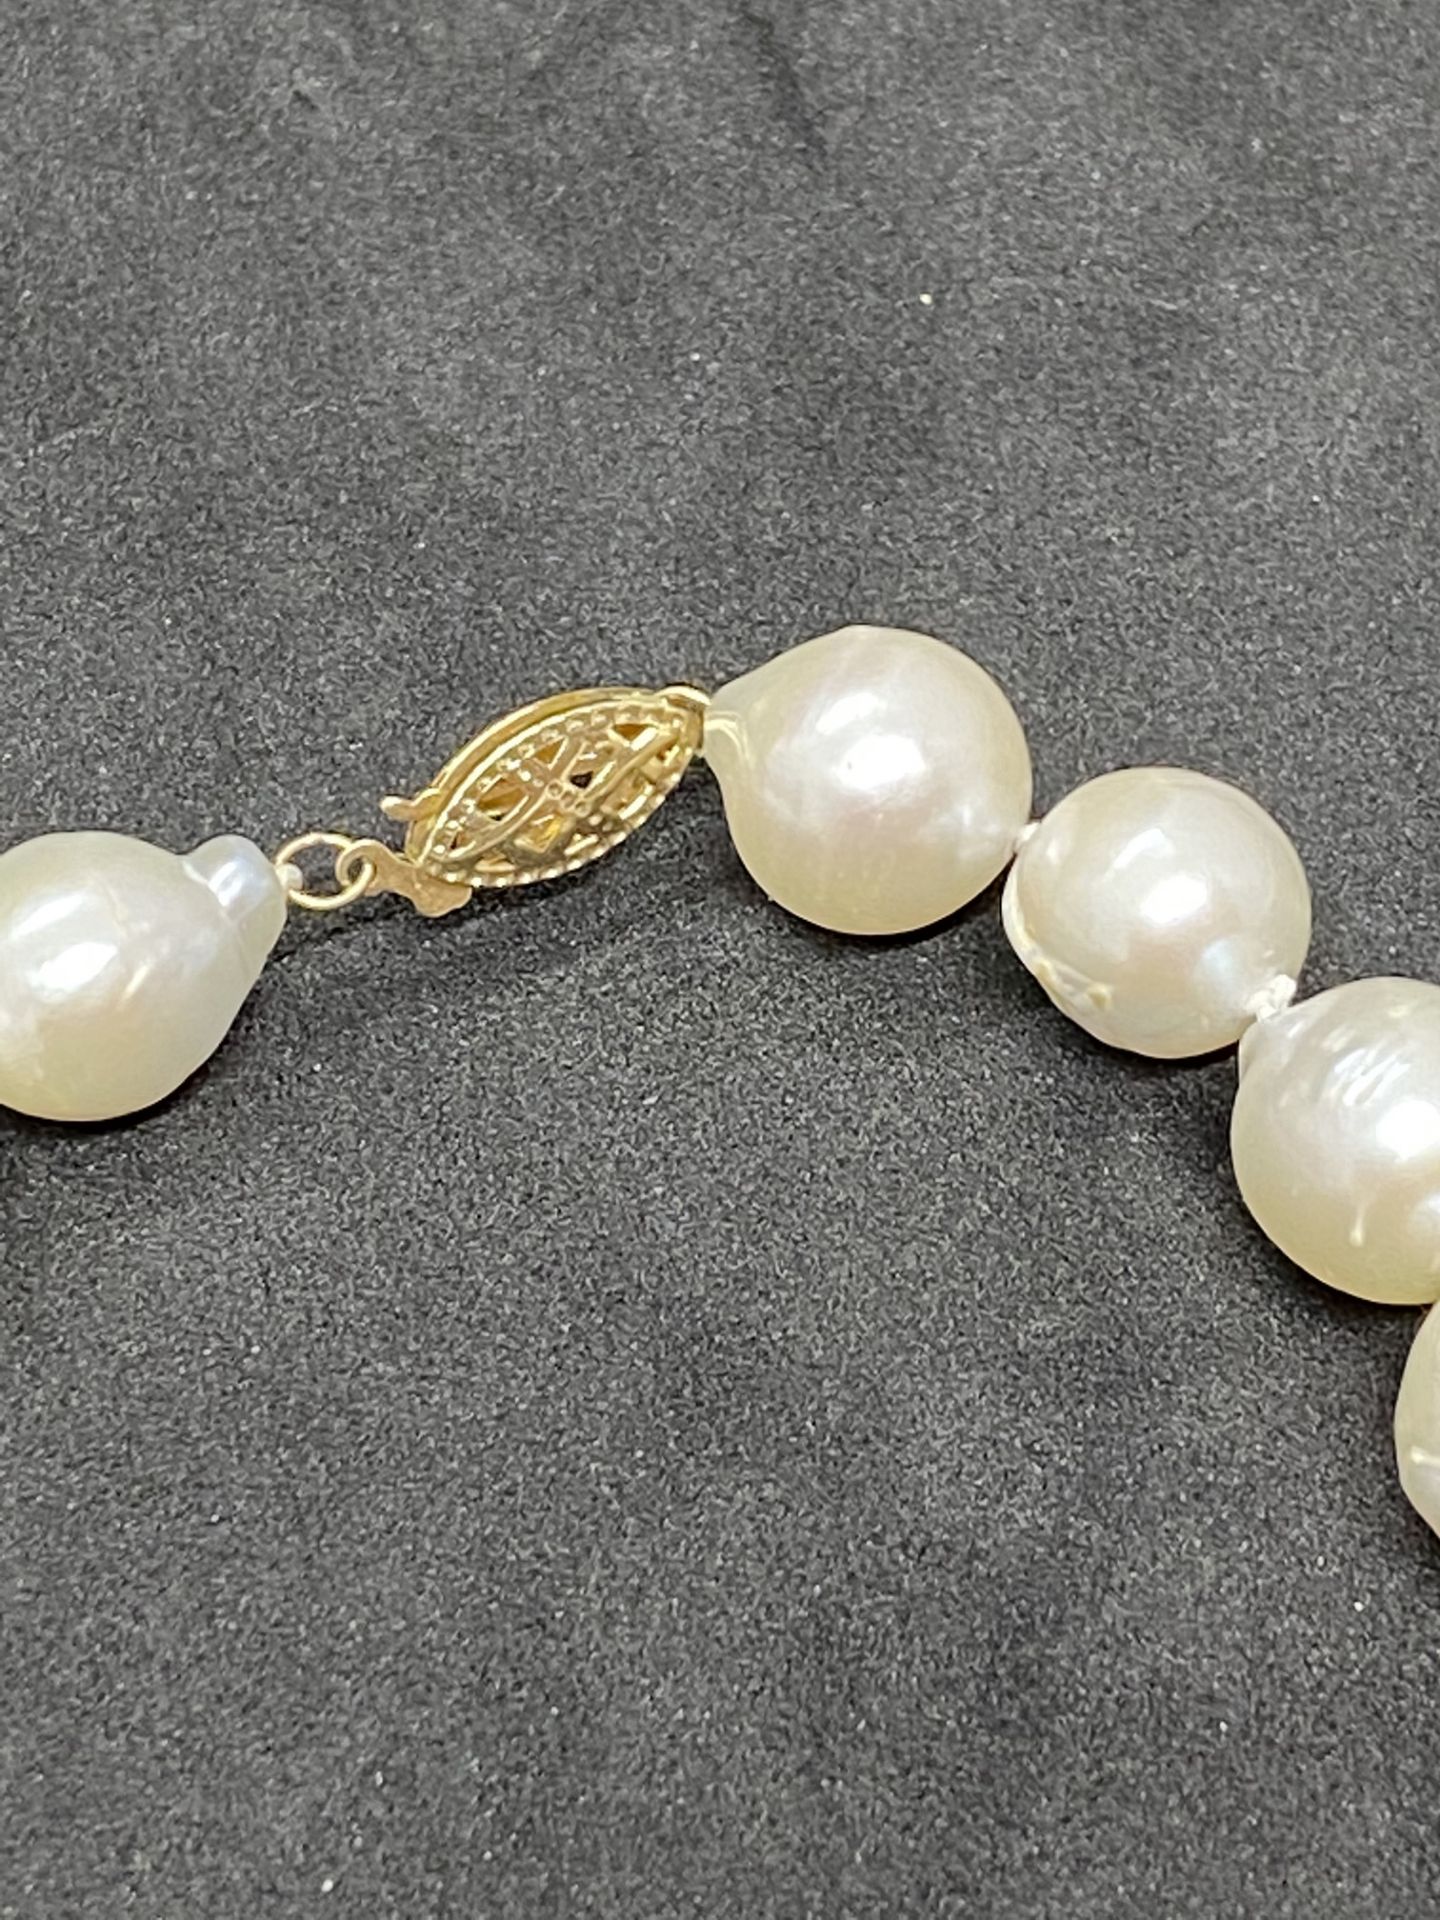 BAROQUE PEARL NECKLACE WITH 14ct GOLD CLASP & BALL SPACERS - Image 3 of 3